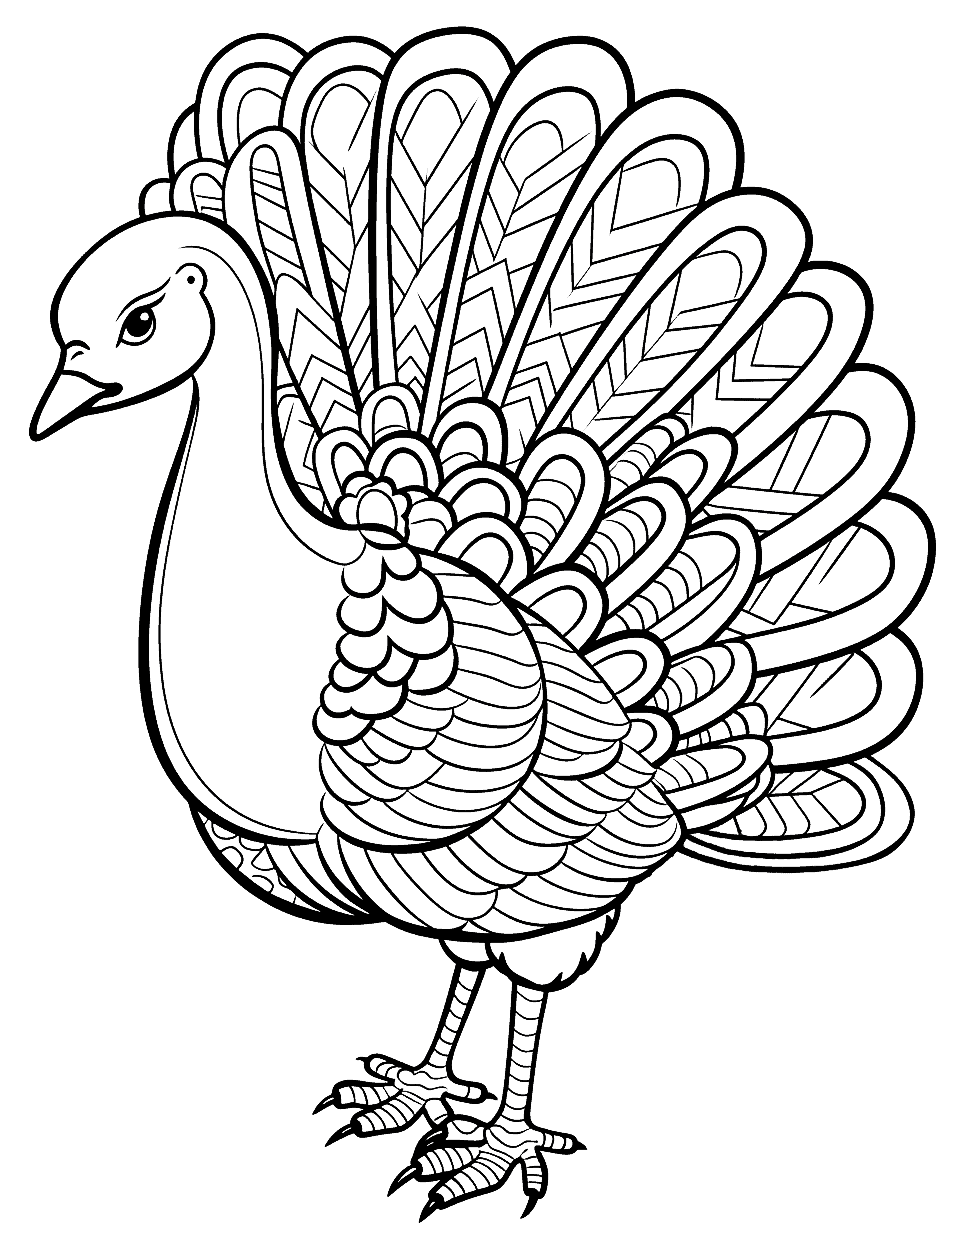 Zentangle Inspired Turkey Coloring Page - A turkey filled with complex zentangle patterns, ideal for older kids.